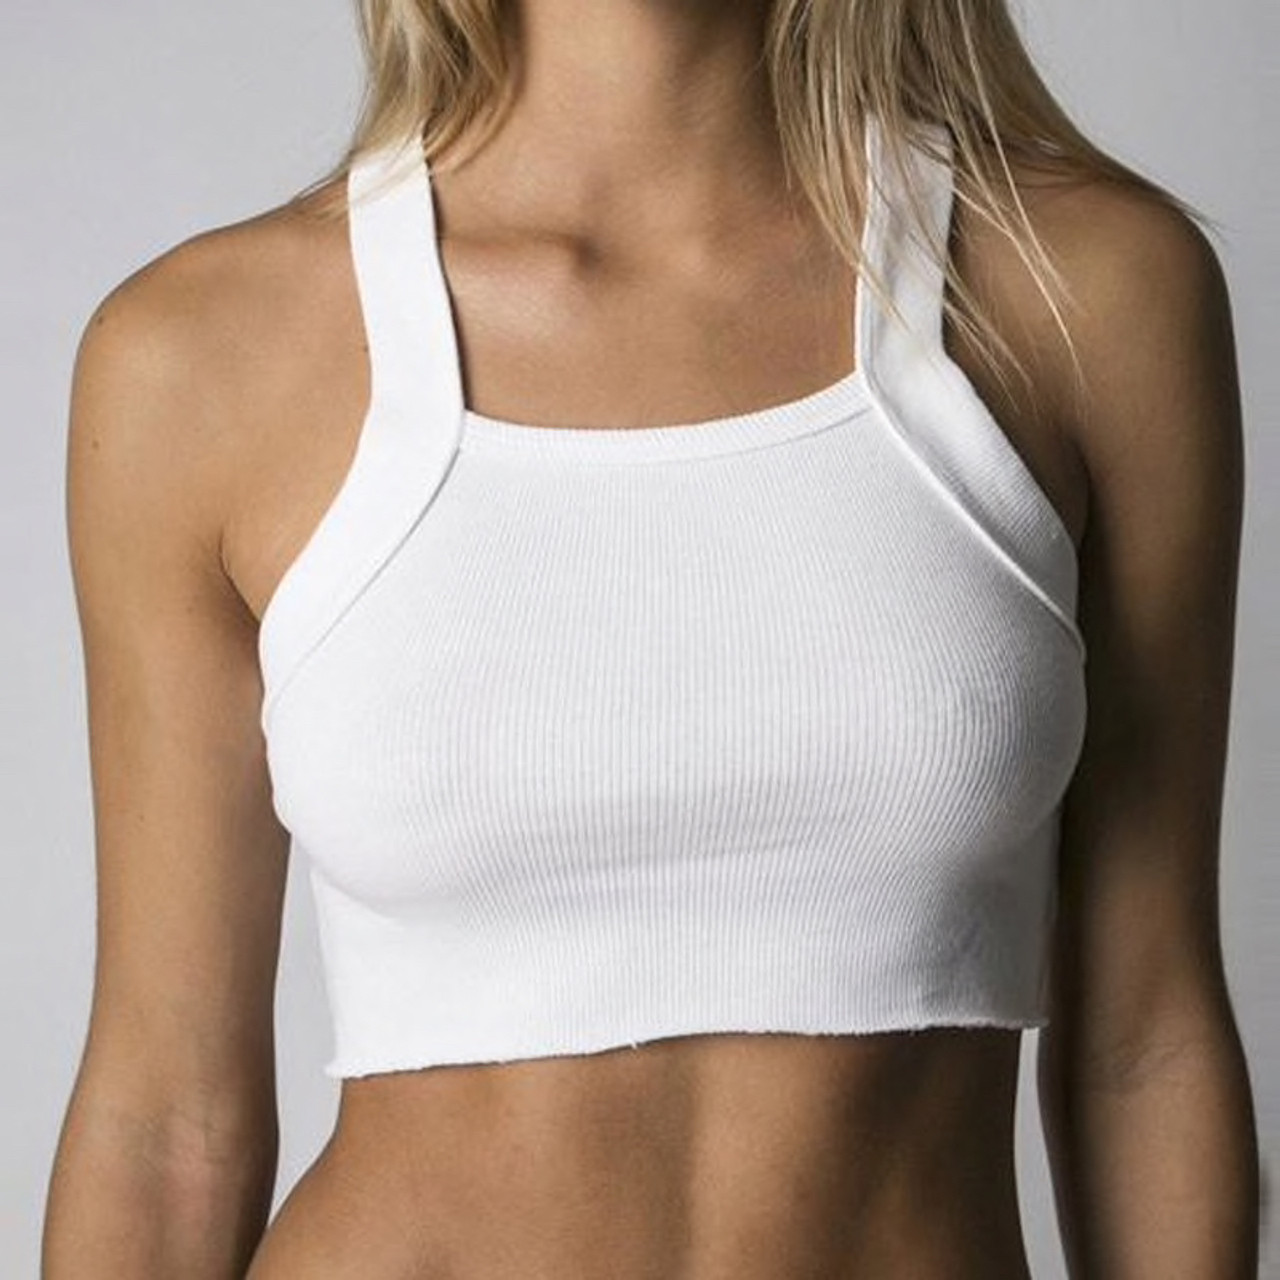 White Ribbed Knitted Crop Tank Top Women Autumn 2019 Sleeveless Sexy Basic White Solid Camis